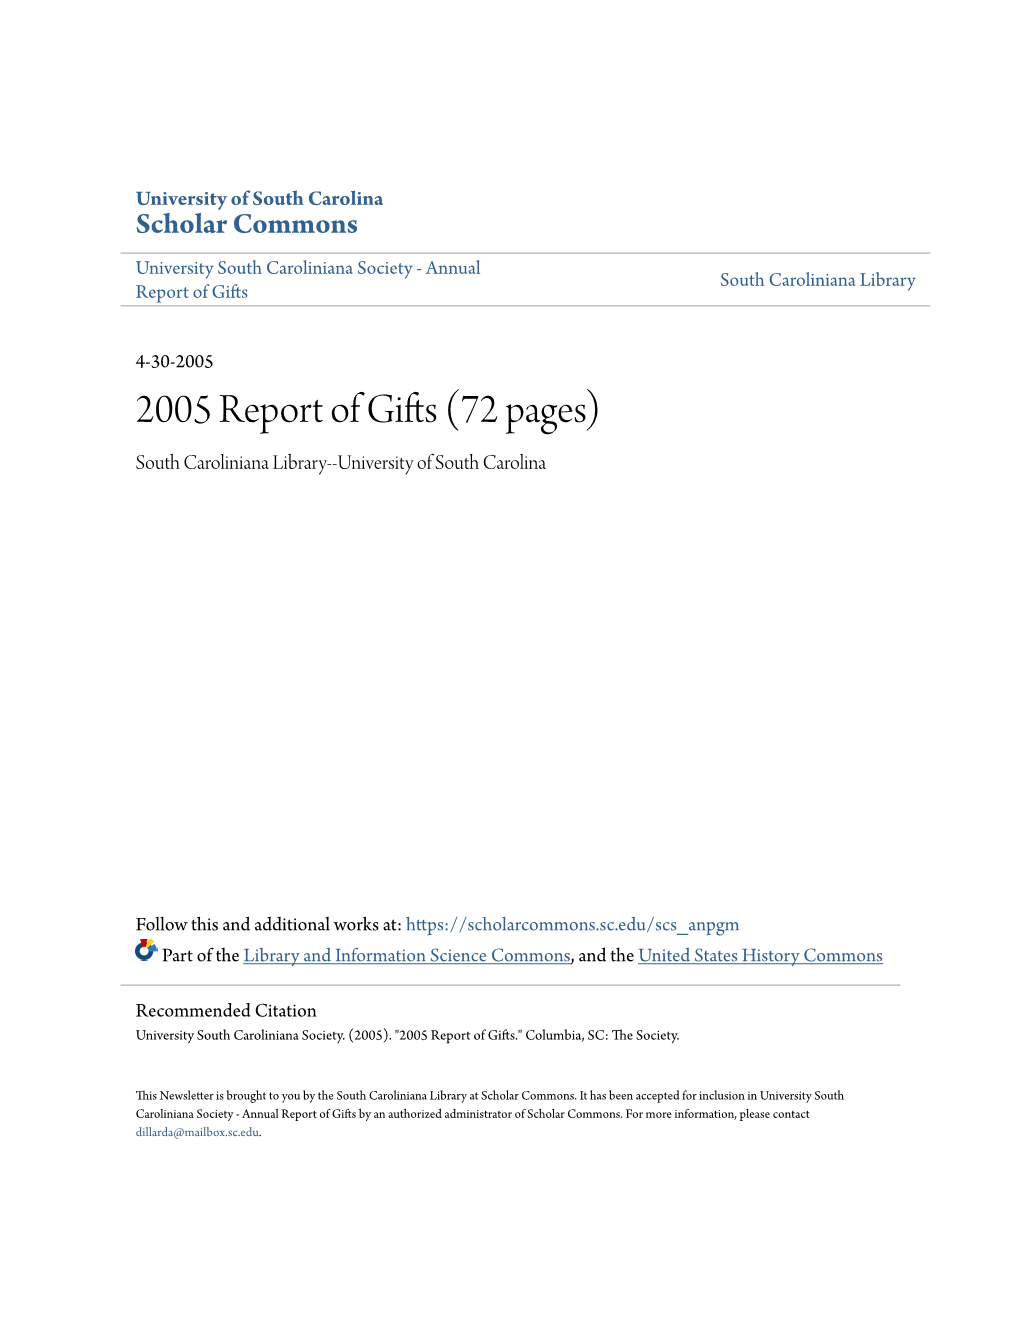 2005 Report of Gifts (72 Pages) South Caroliniana Library--University of South Carolina